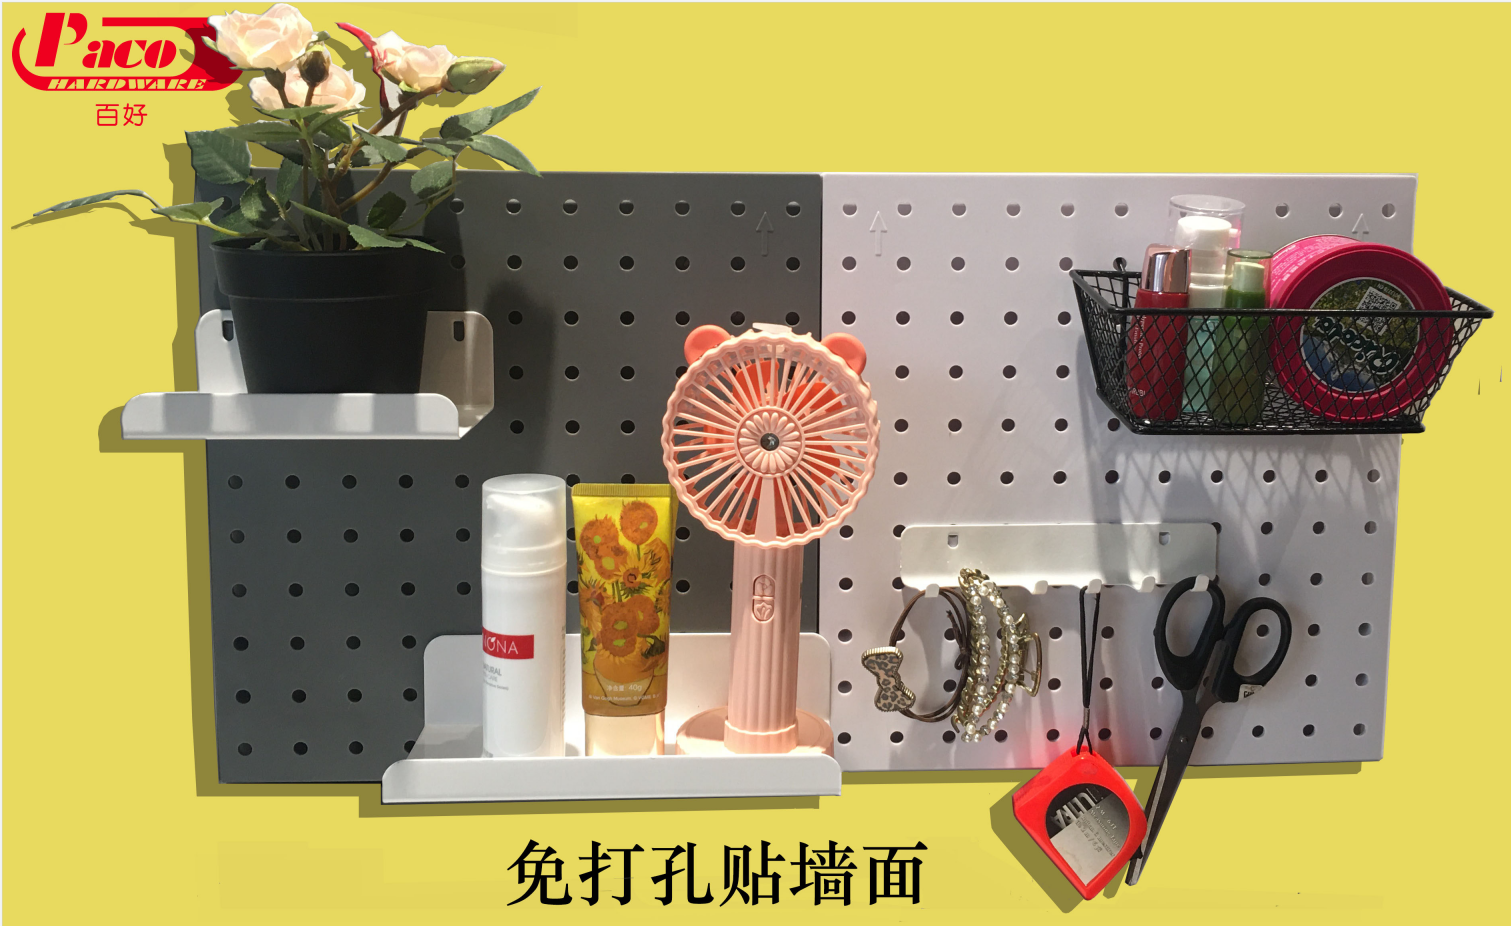 Decorative Pegboard Basket, Pegboard Rack and Pegboard Hook for Organizing Various Tools Manufacturers, Decorative Pegboard Basket, Pegboard Rack and Pegboard Hook for Organizing Various Tools Factory, Supply Decorative Pegboard Basket, Pegboard Rack and Pegboard Hook for Organizing Various Tools